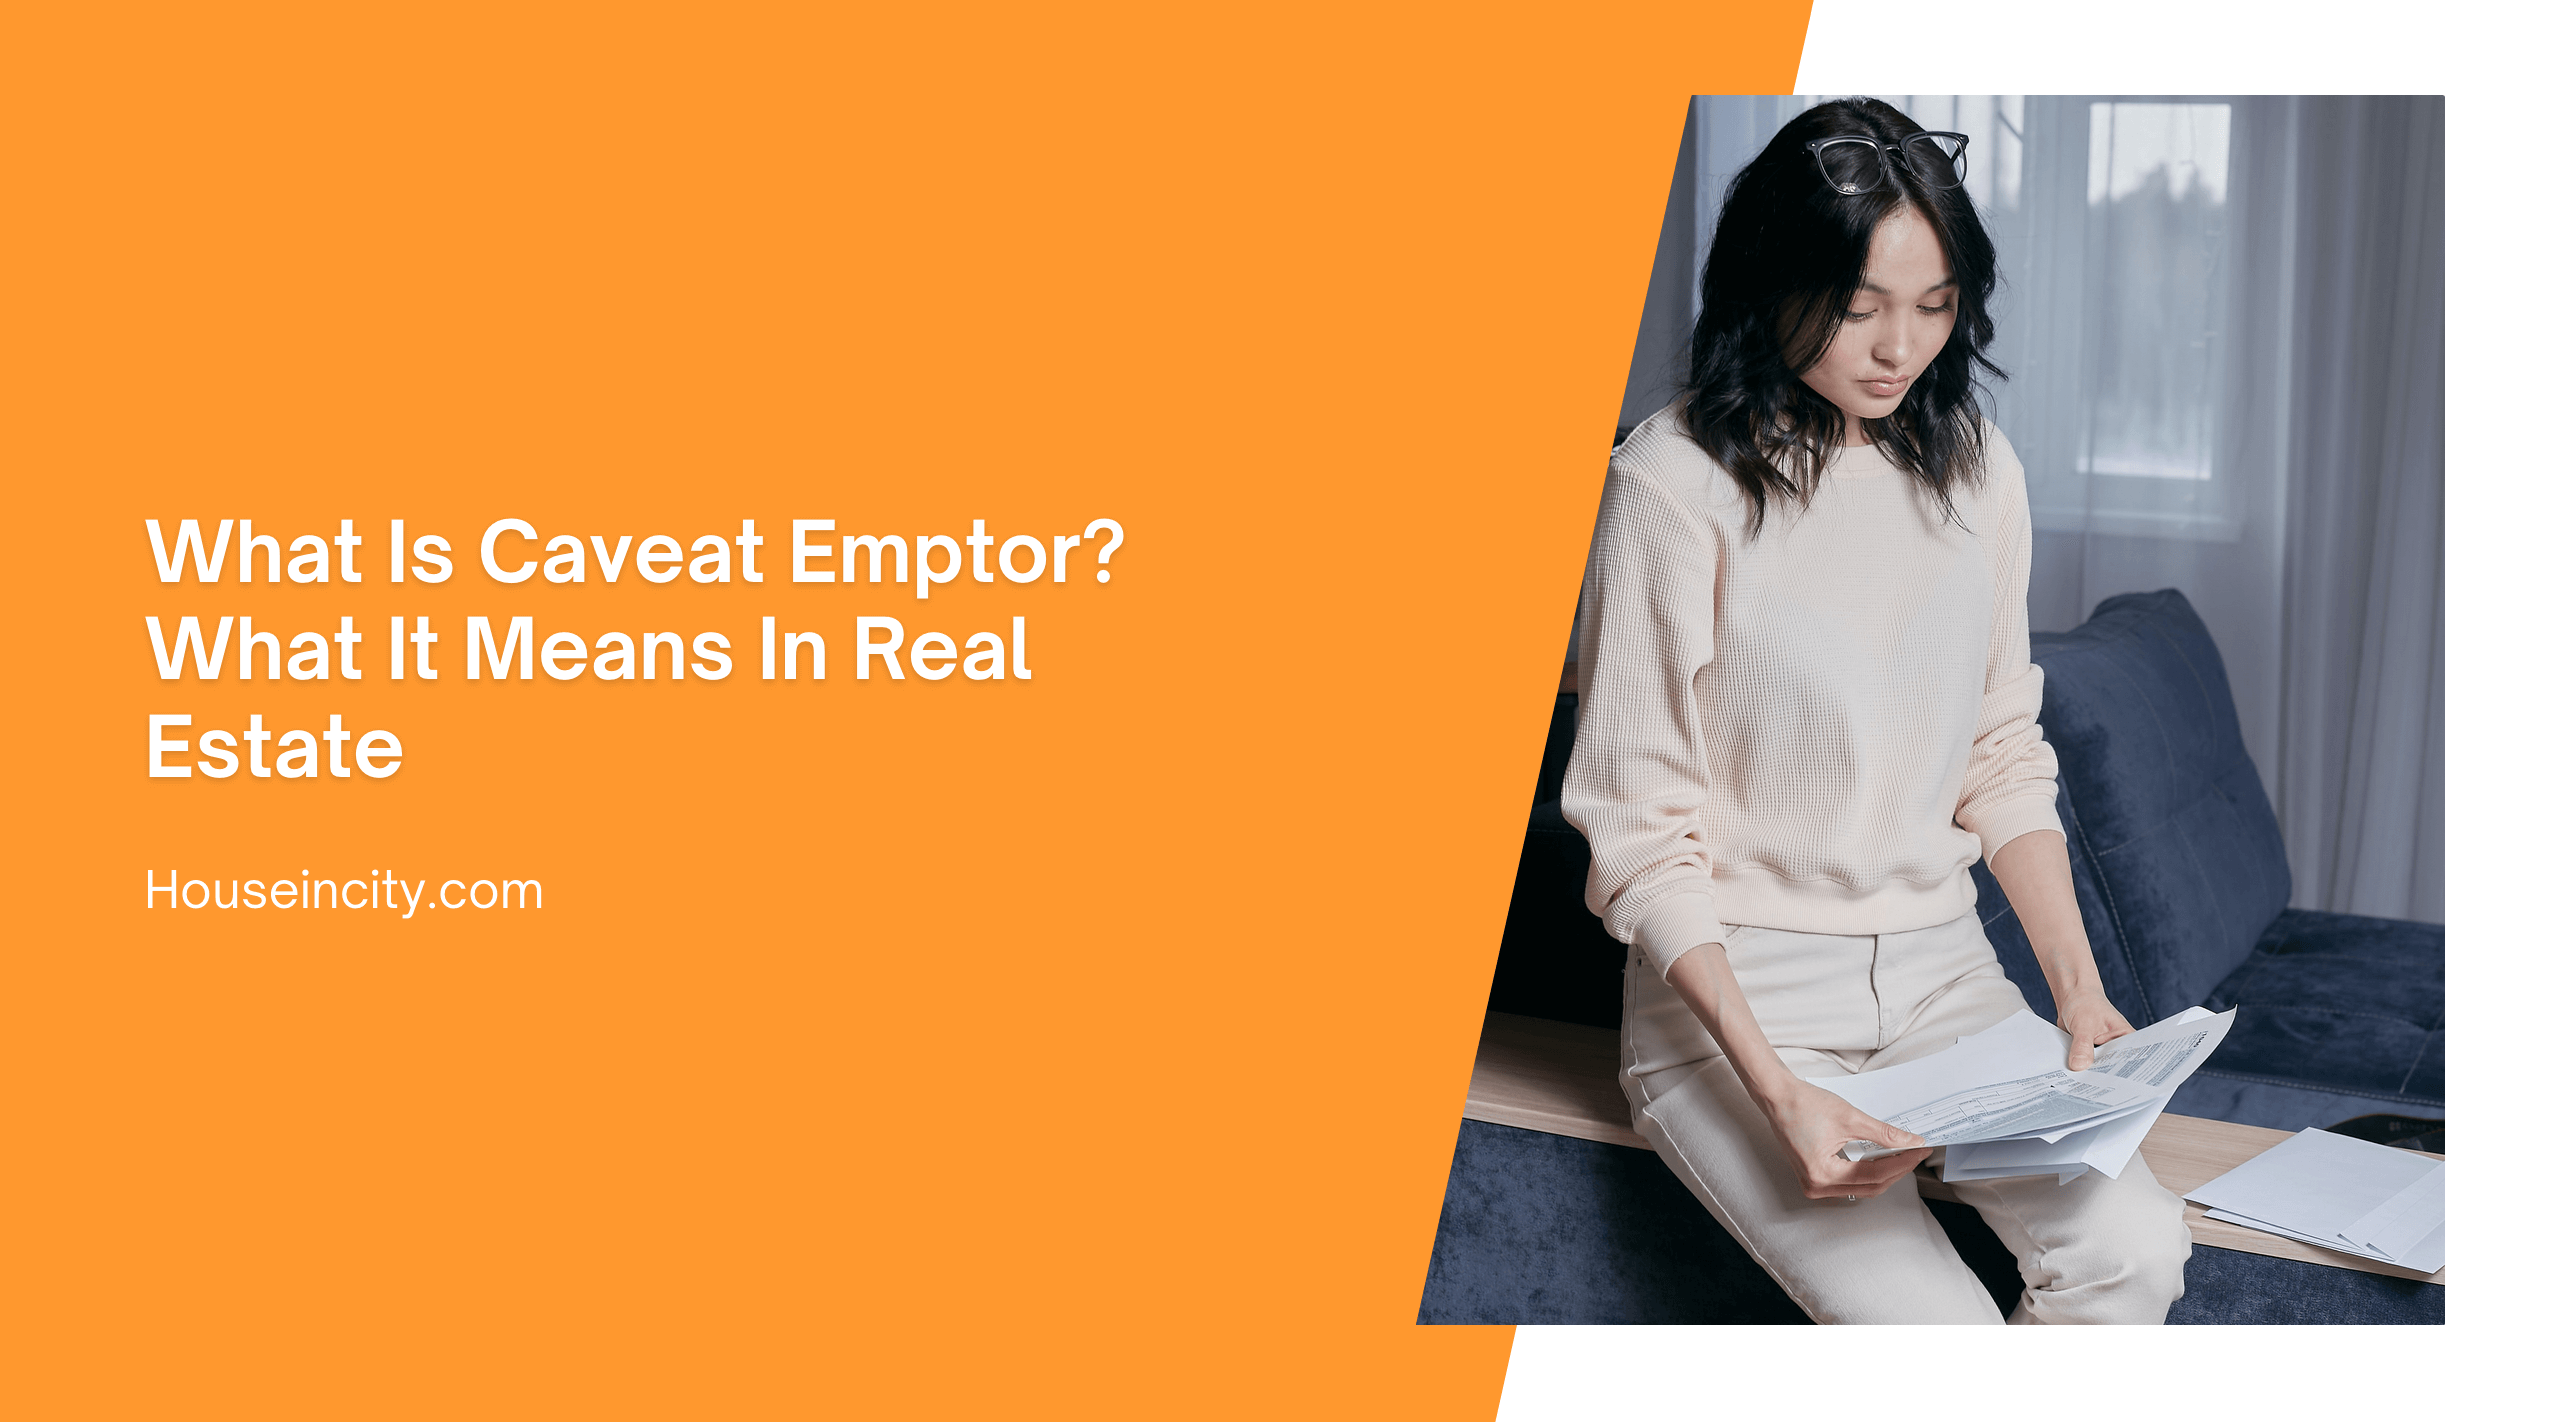 What Is Caveat Emptor? What It Means In Real Estate